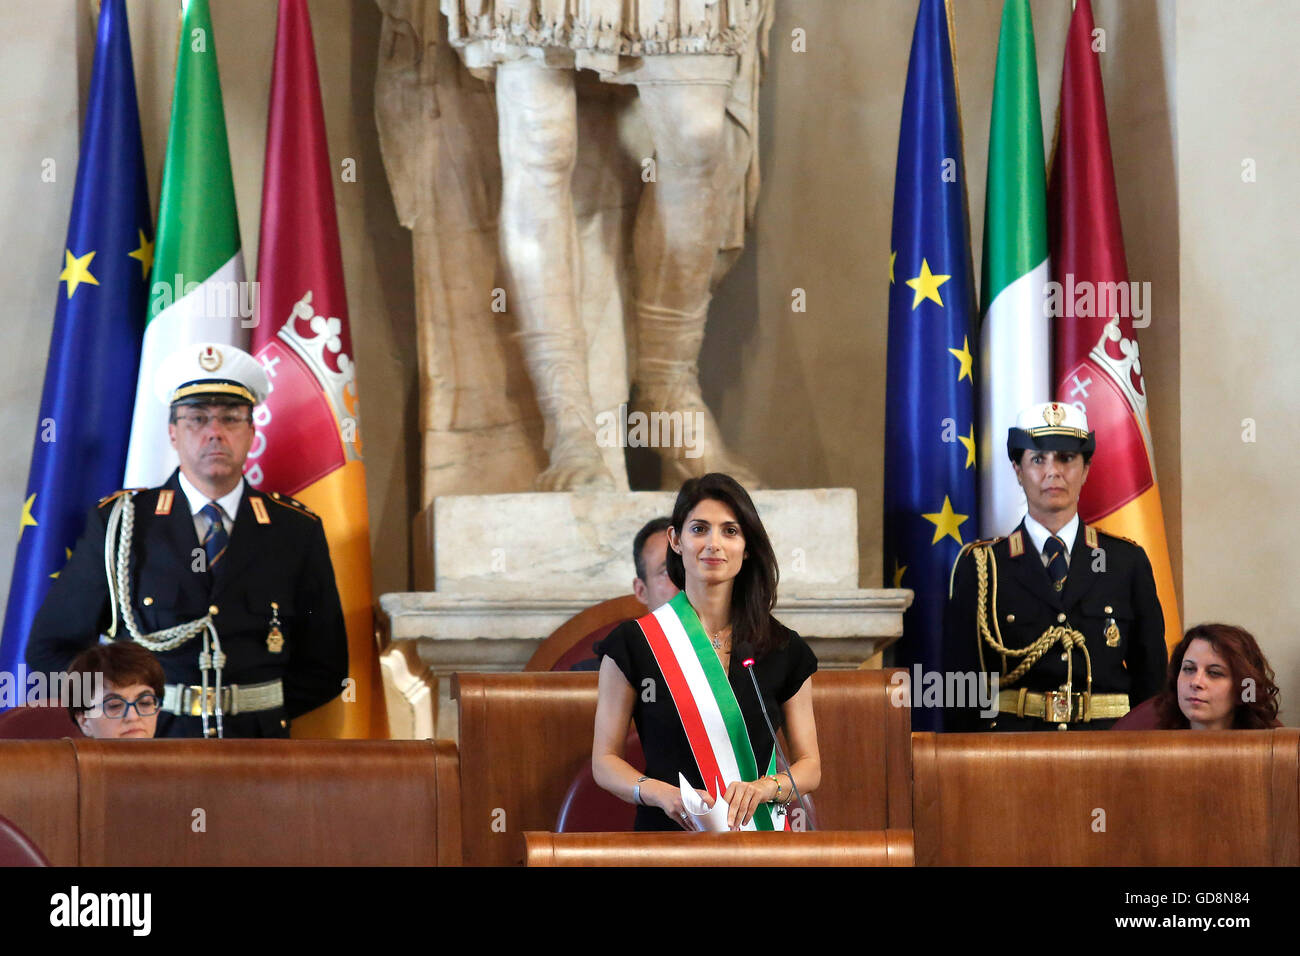 Virginia Raggi Rome 7th July 2016. Campidoglio, first session of the Capitoline Assembly with the new Mayor of Rome Photo Samant Stock Photo